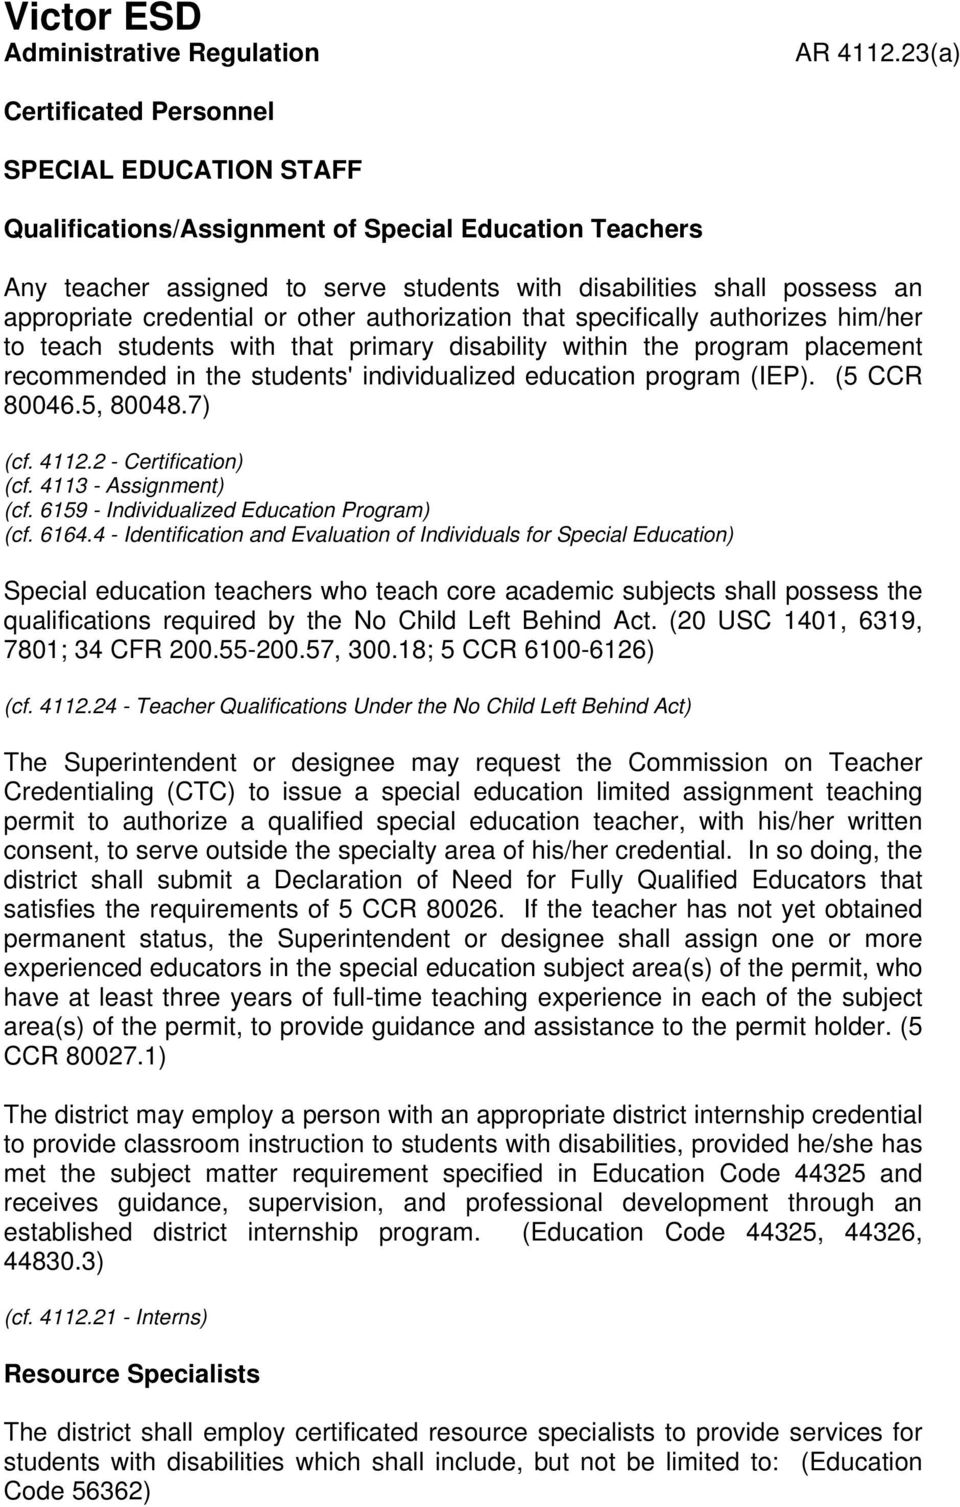 credential or other authorization that specifically authorizes him/her to teach students with that primary disability within the program placement recommended in the students' individualized